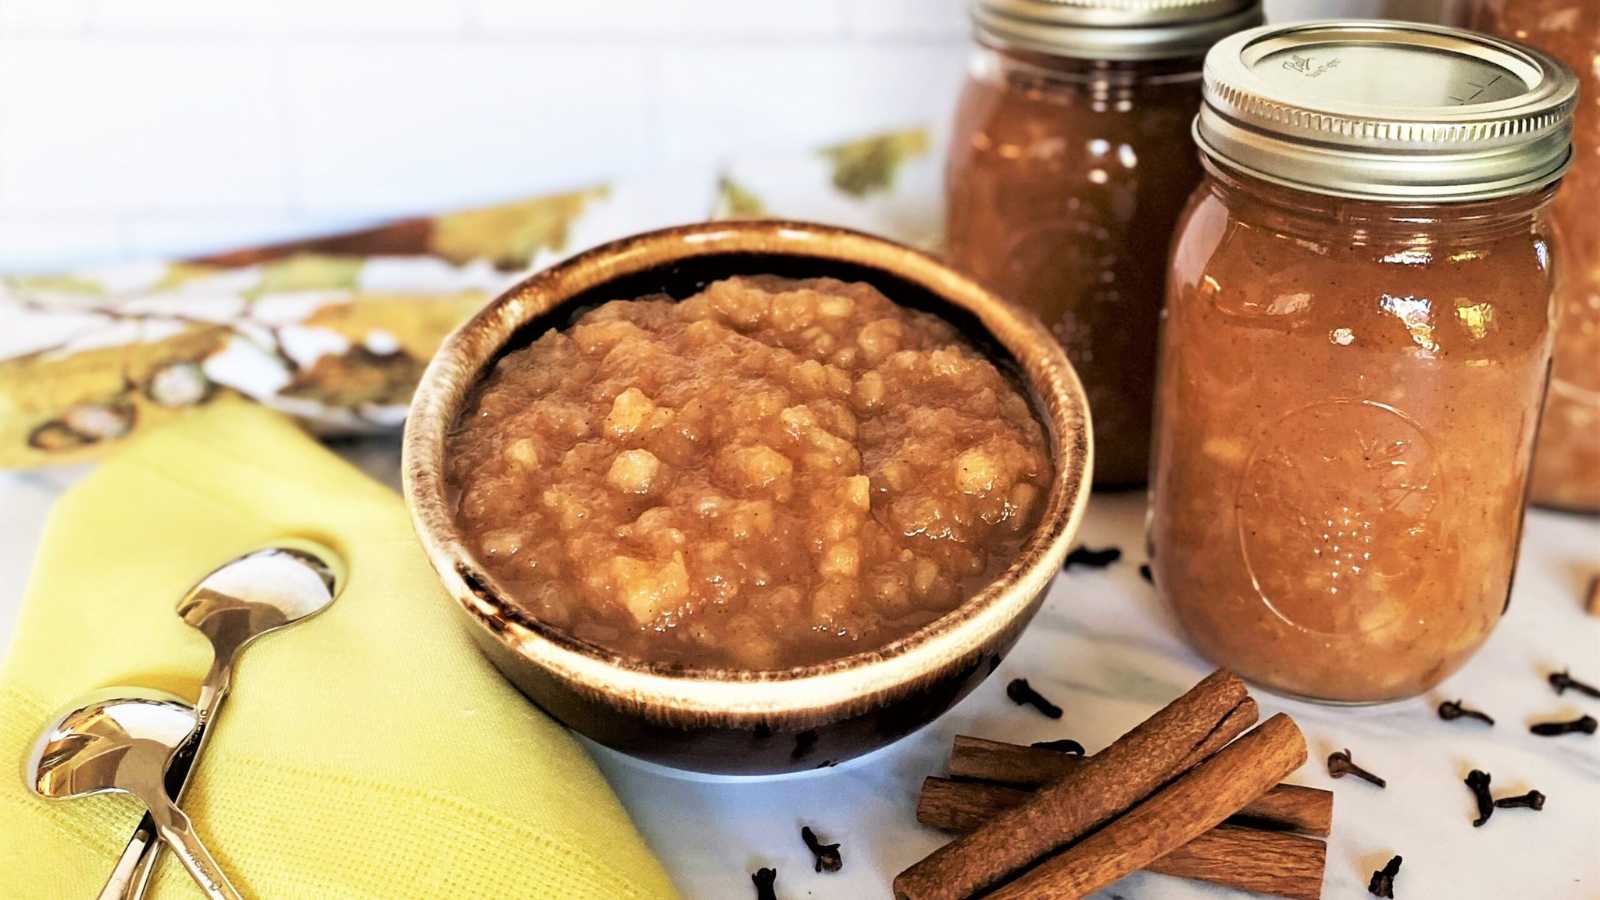 A bowl and jars of homemade applesauce with 2 spoon beside.